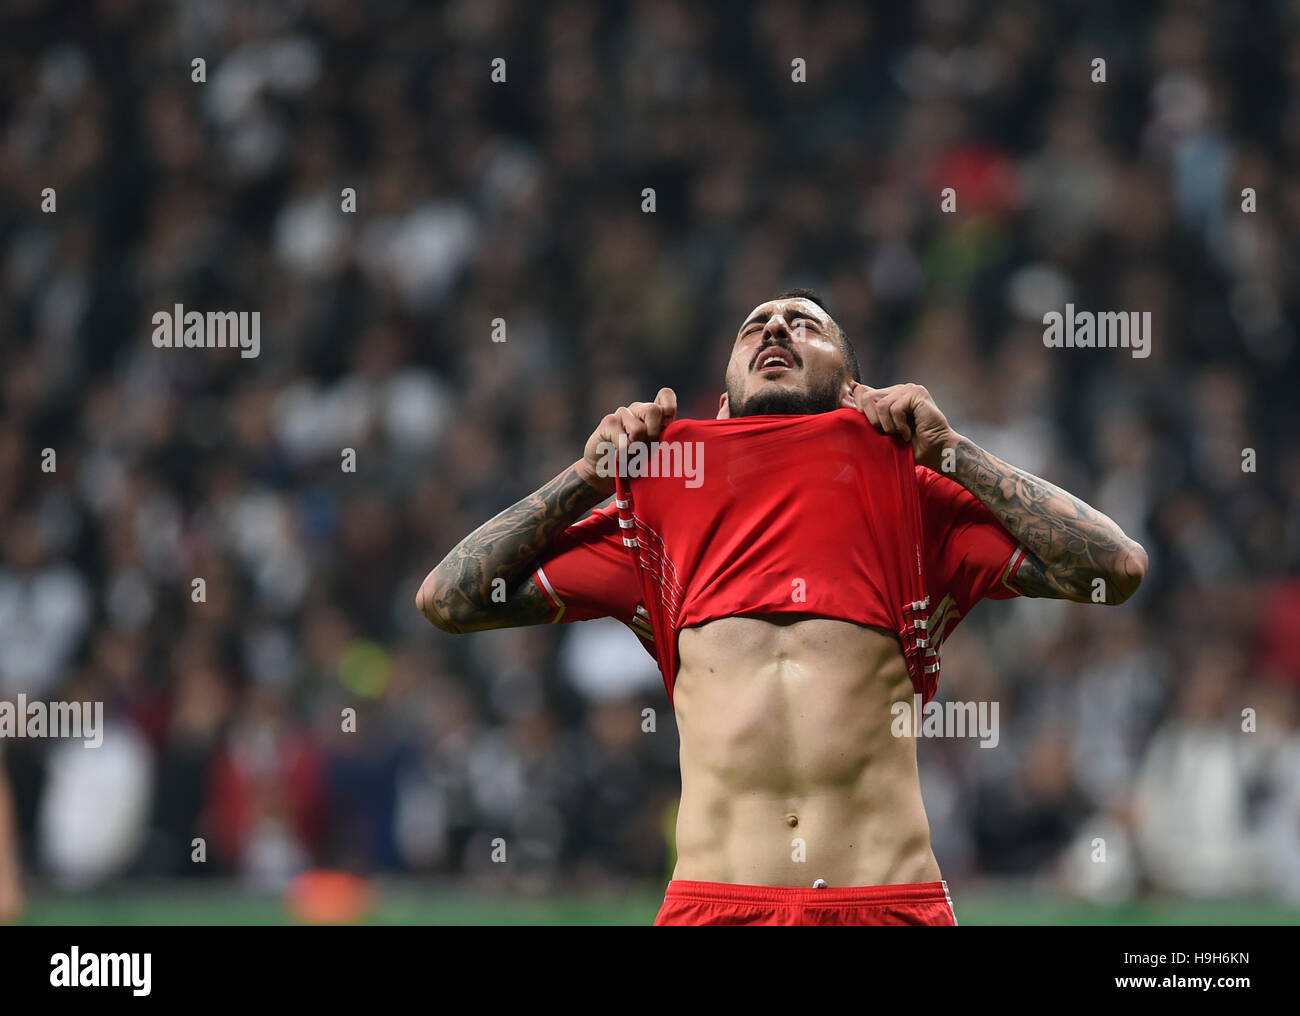 Istanbul, Turkey. 24th Nov, 2016. Benfica player Kostas Mitroglou reacts during the UEFA Champions League Group B match between Turkey's Besiktas and Portugal's Benfica in Istanbul, Turkey, on Nov. 23, 2016. The match ended with a 3-3 draw. (Xinhua/He Canling)(wll) Stock Photo